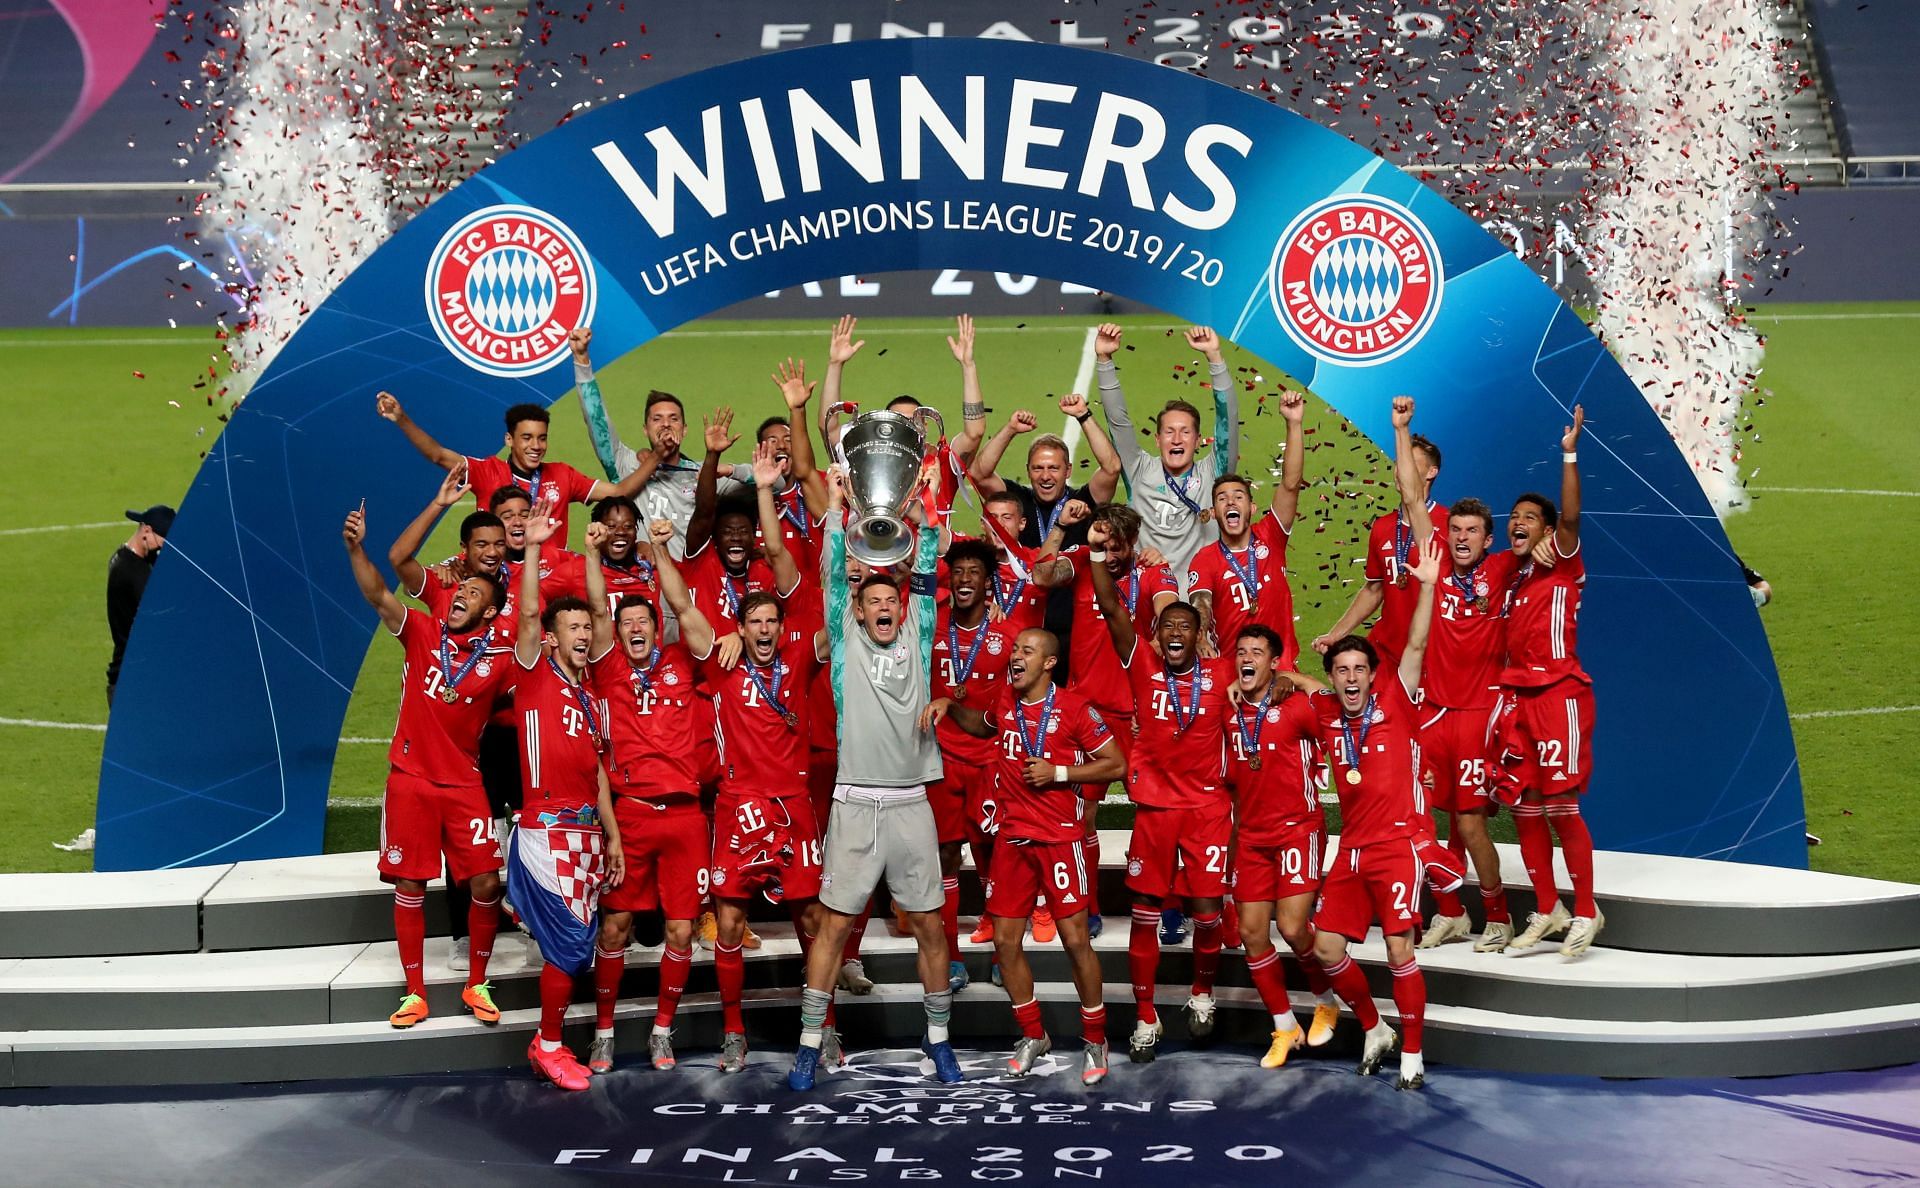 Bayern Munich are one of the most decorated clubs in Europe